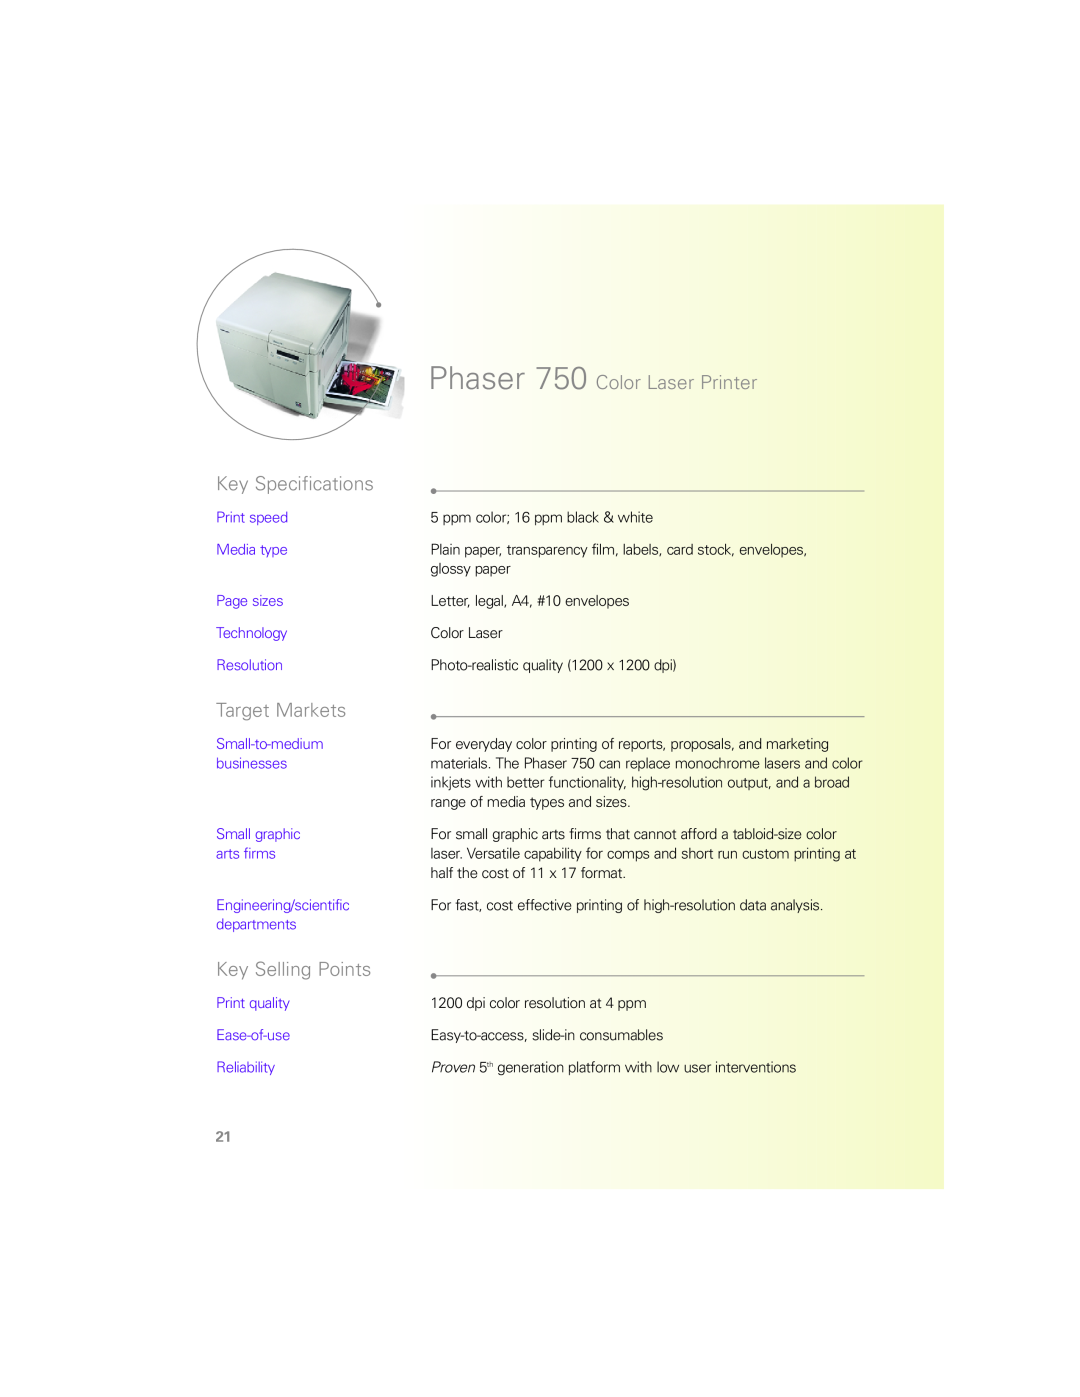 Xerox N Series manual Phaser 750 Color Laser Printer Key Specifications, Target Markets, Key Selling Points 